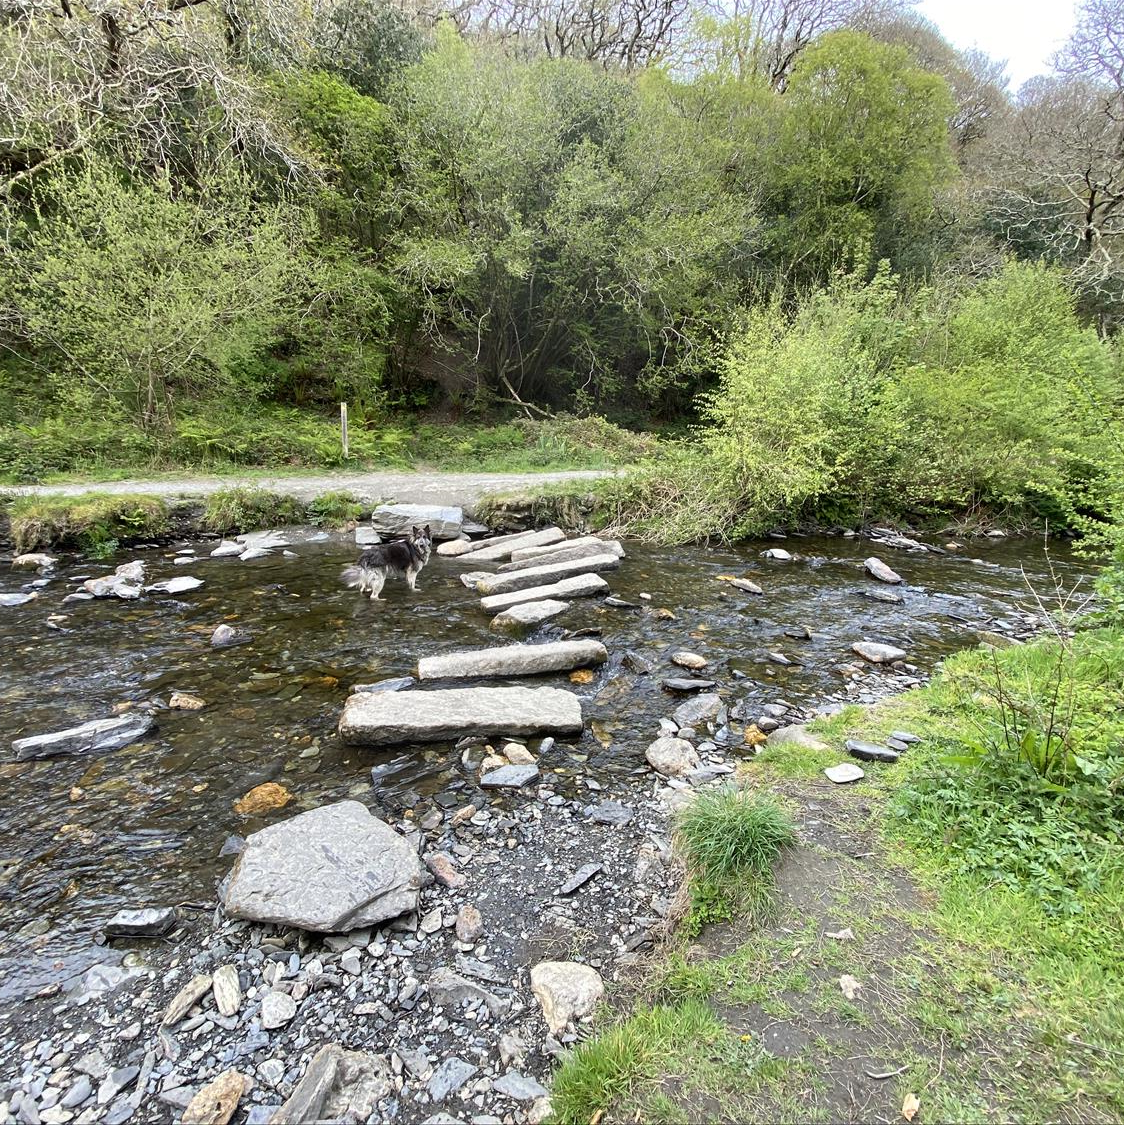 Stepping stones over the Jordan River on the walk from Polrunny Farm around Boscastle, Cornwall